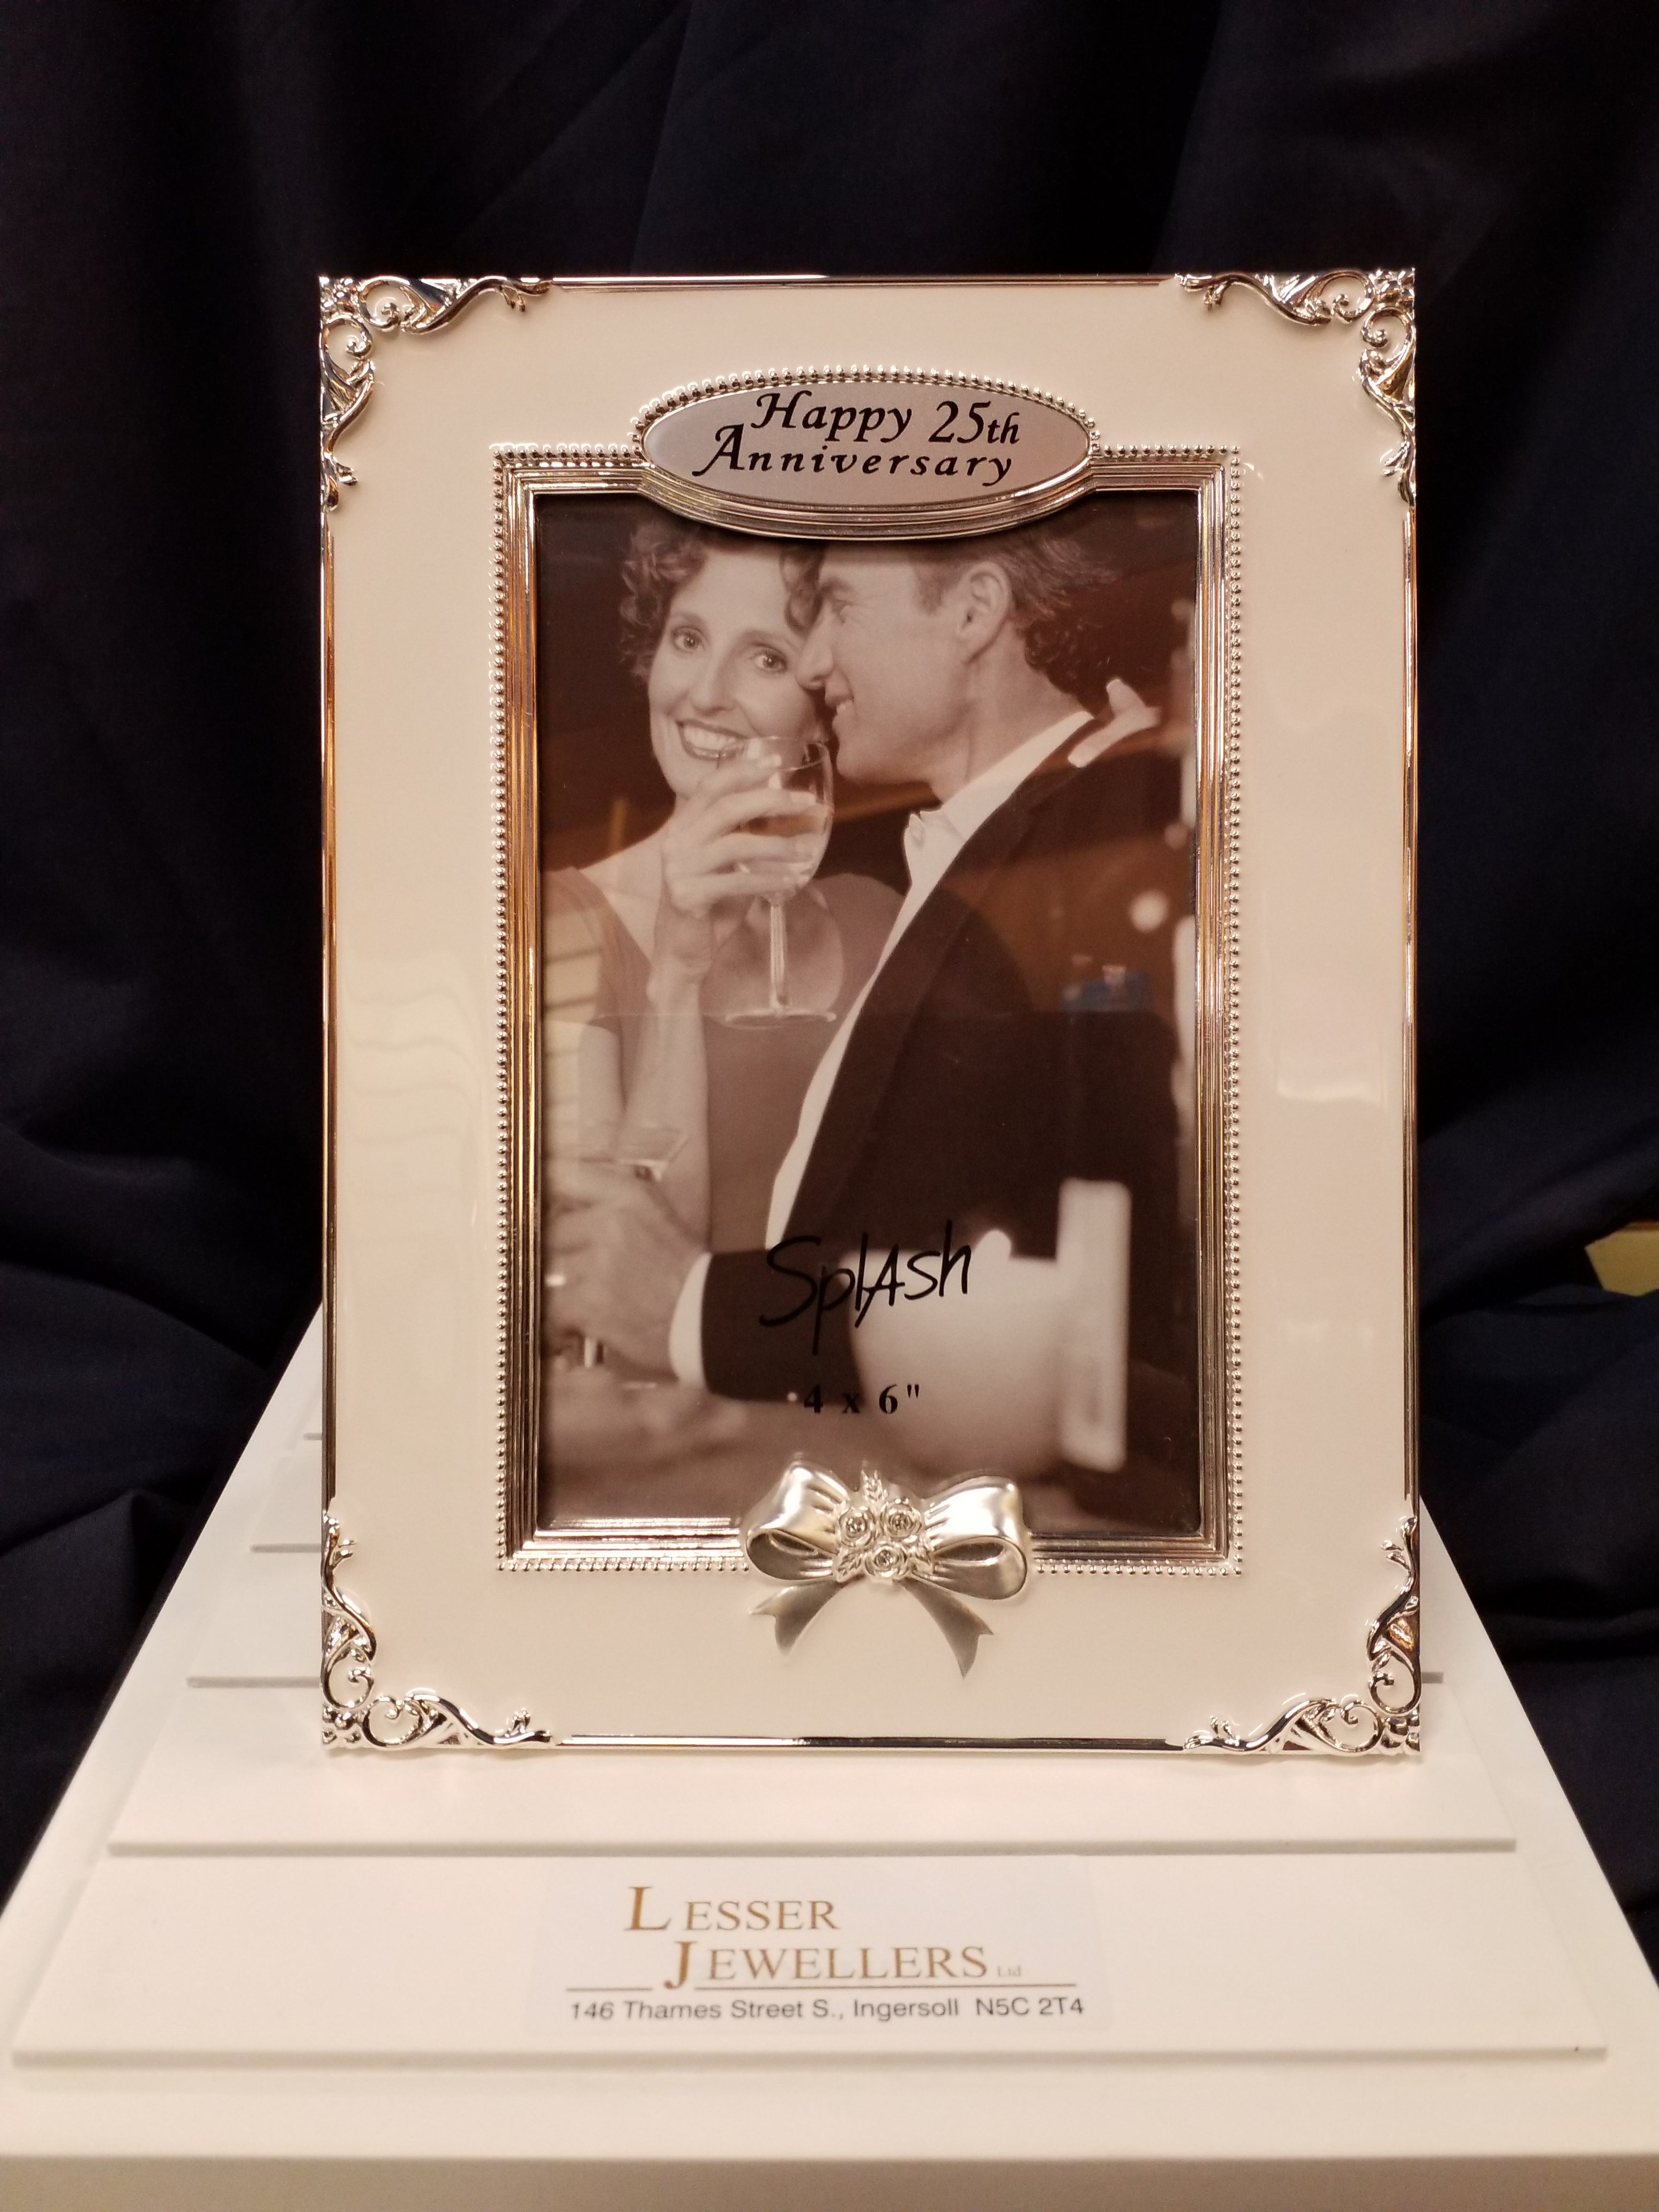 Picture Frame - Happy 25th Anniversary